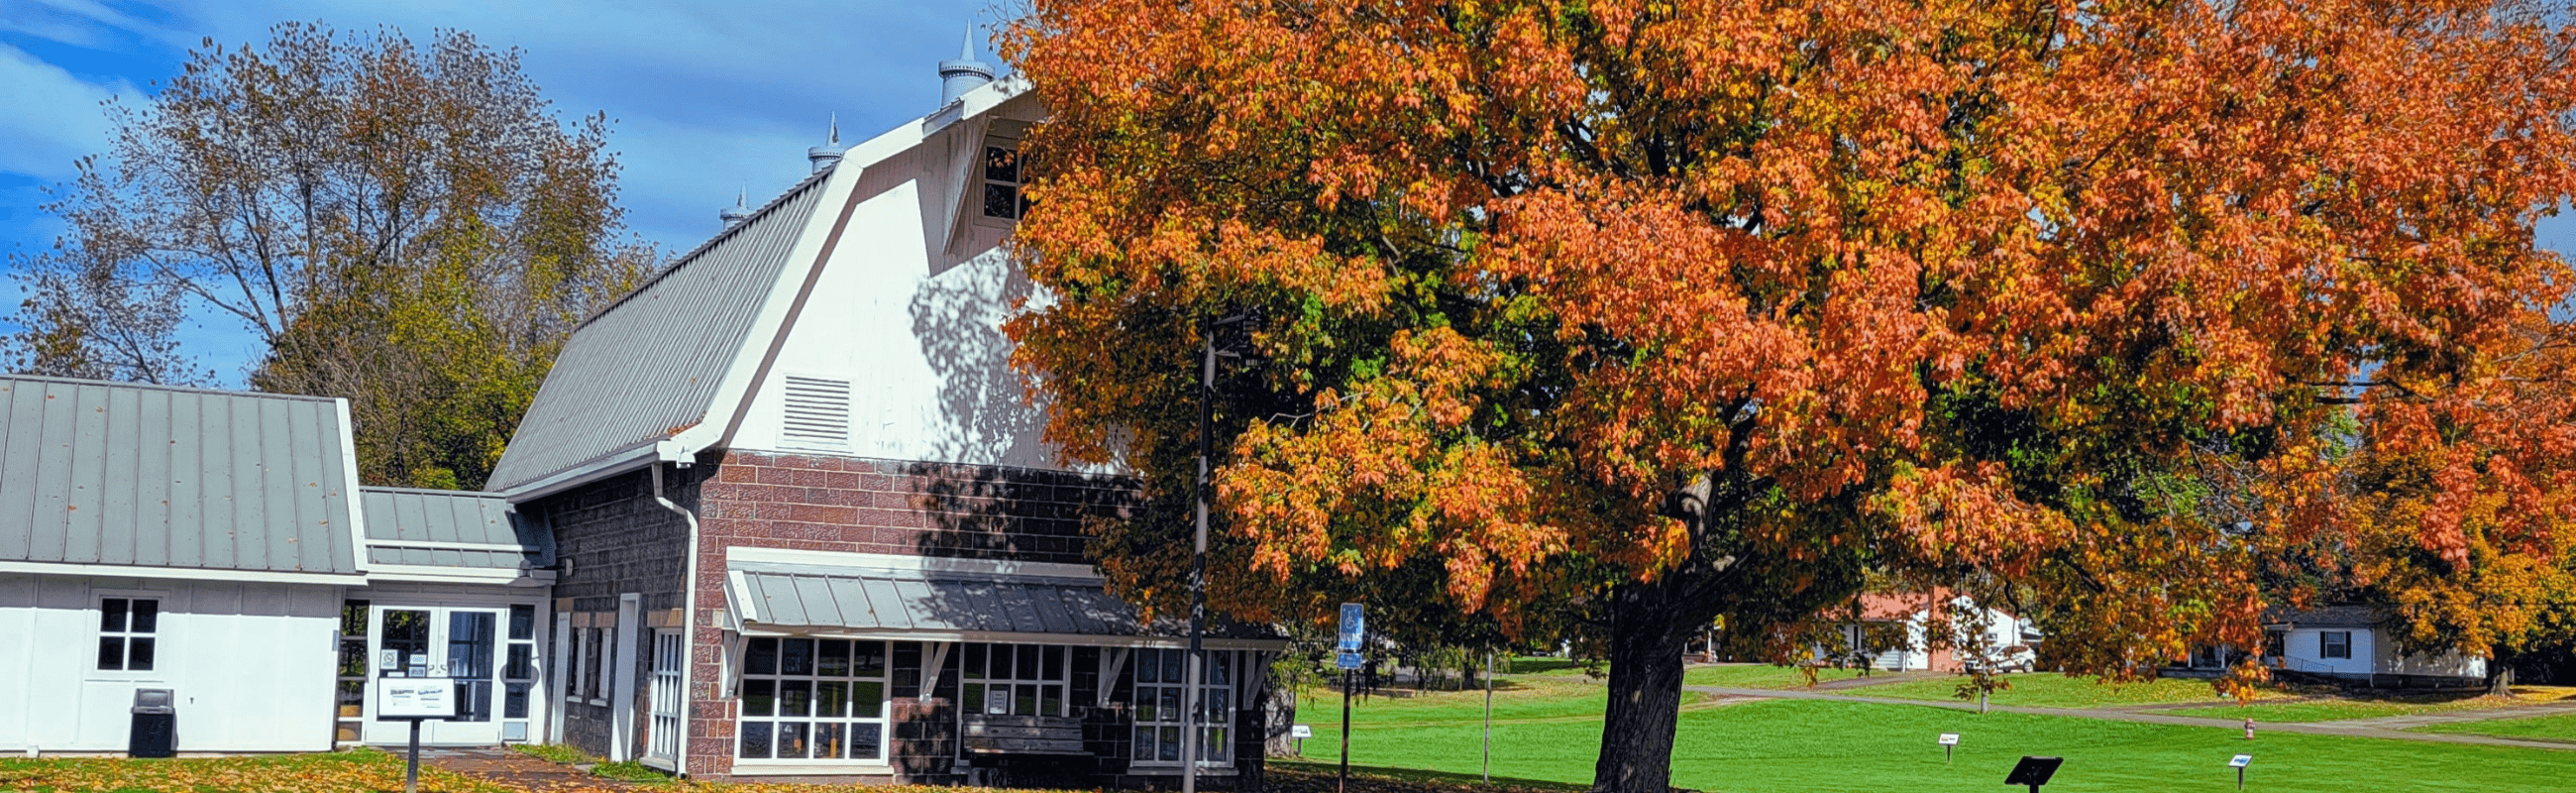 Racine library in autumn with maple tree out front, leaves changing 